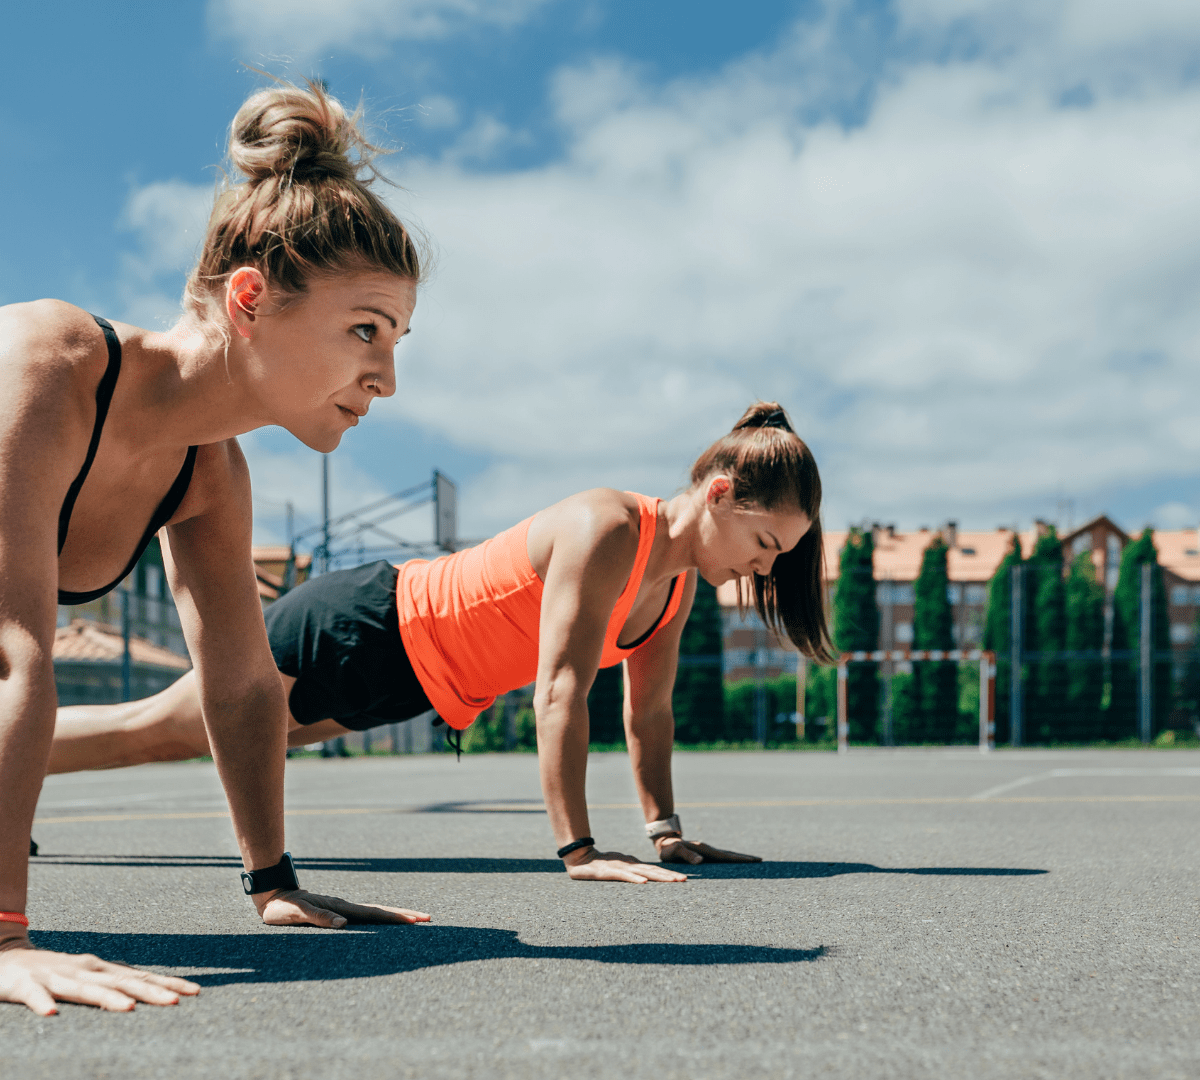 The Fastest Way to Do More Pushups